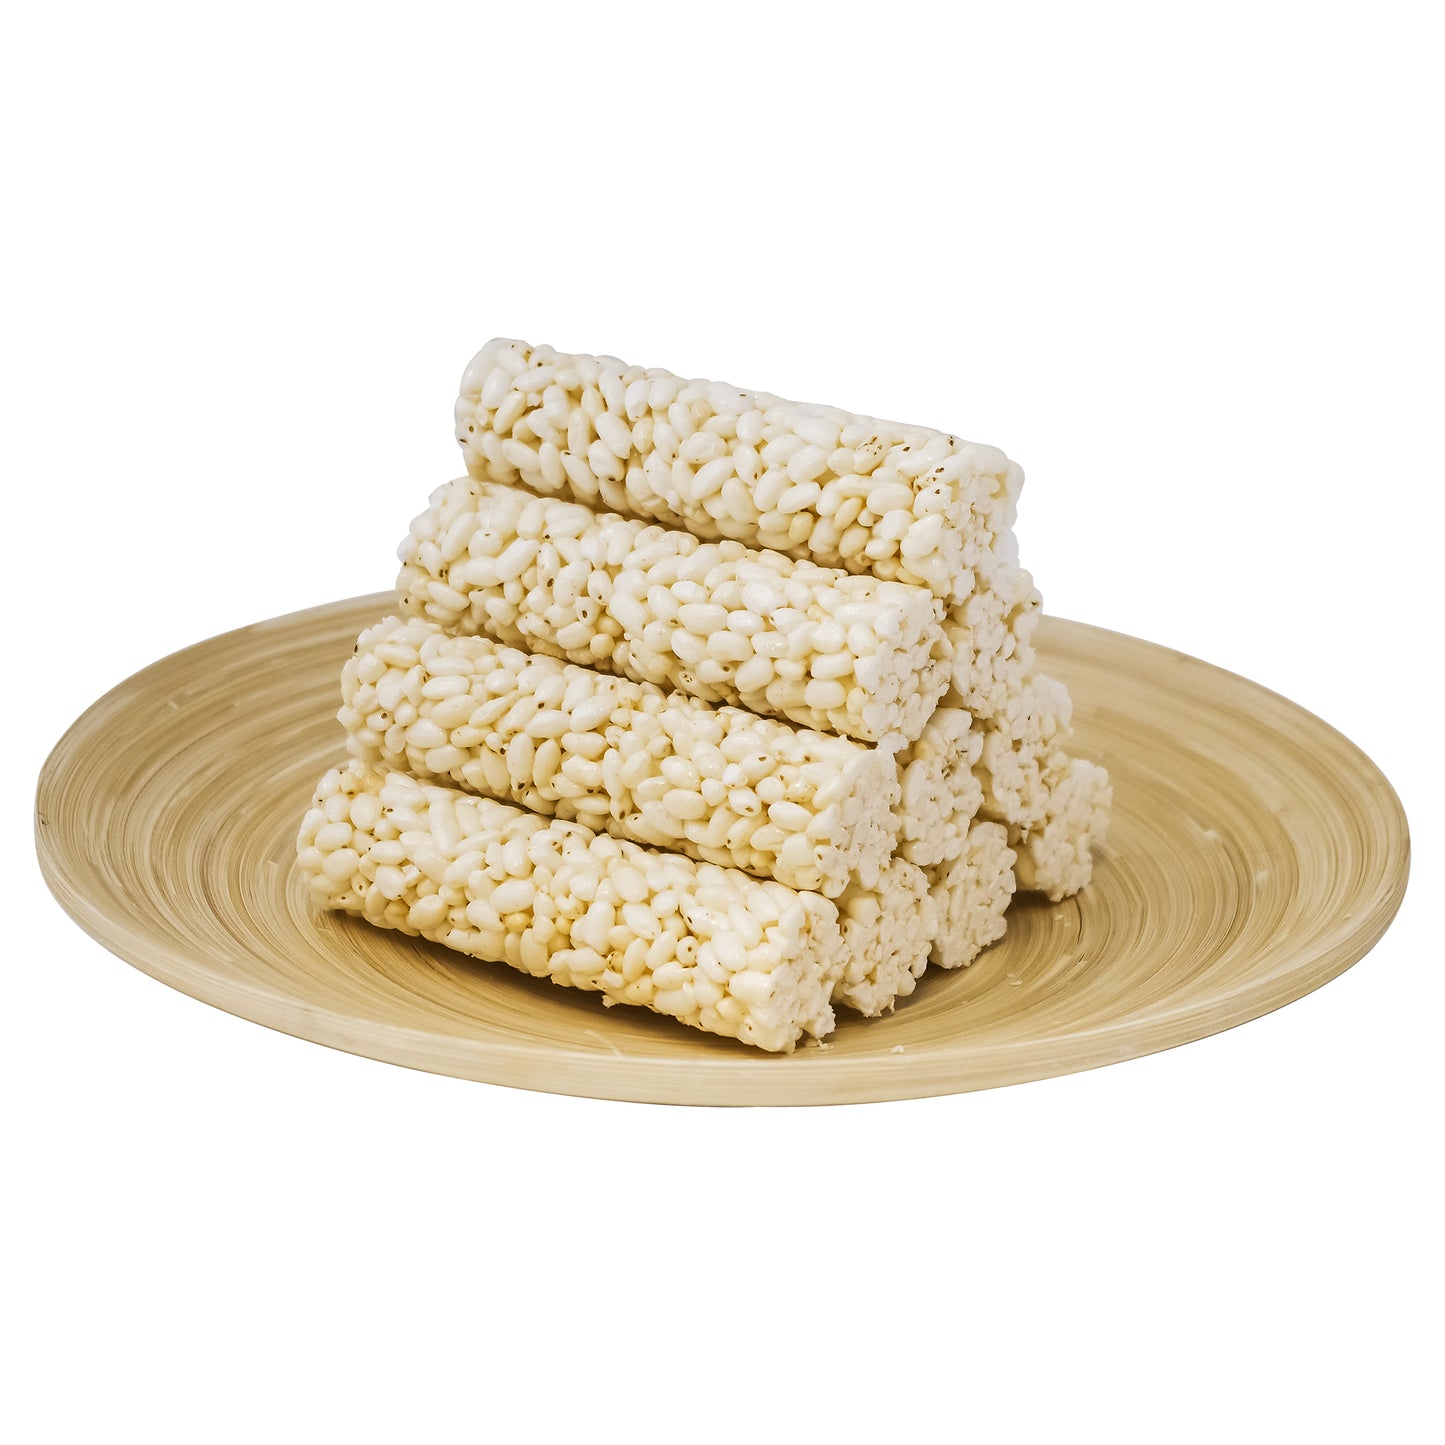 "GreenLife Crunchy Rice Roll Snack, 2.7oz  7Roll 3, 6, 12Packs 1 Order."